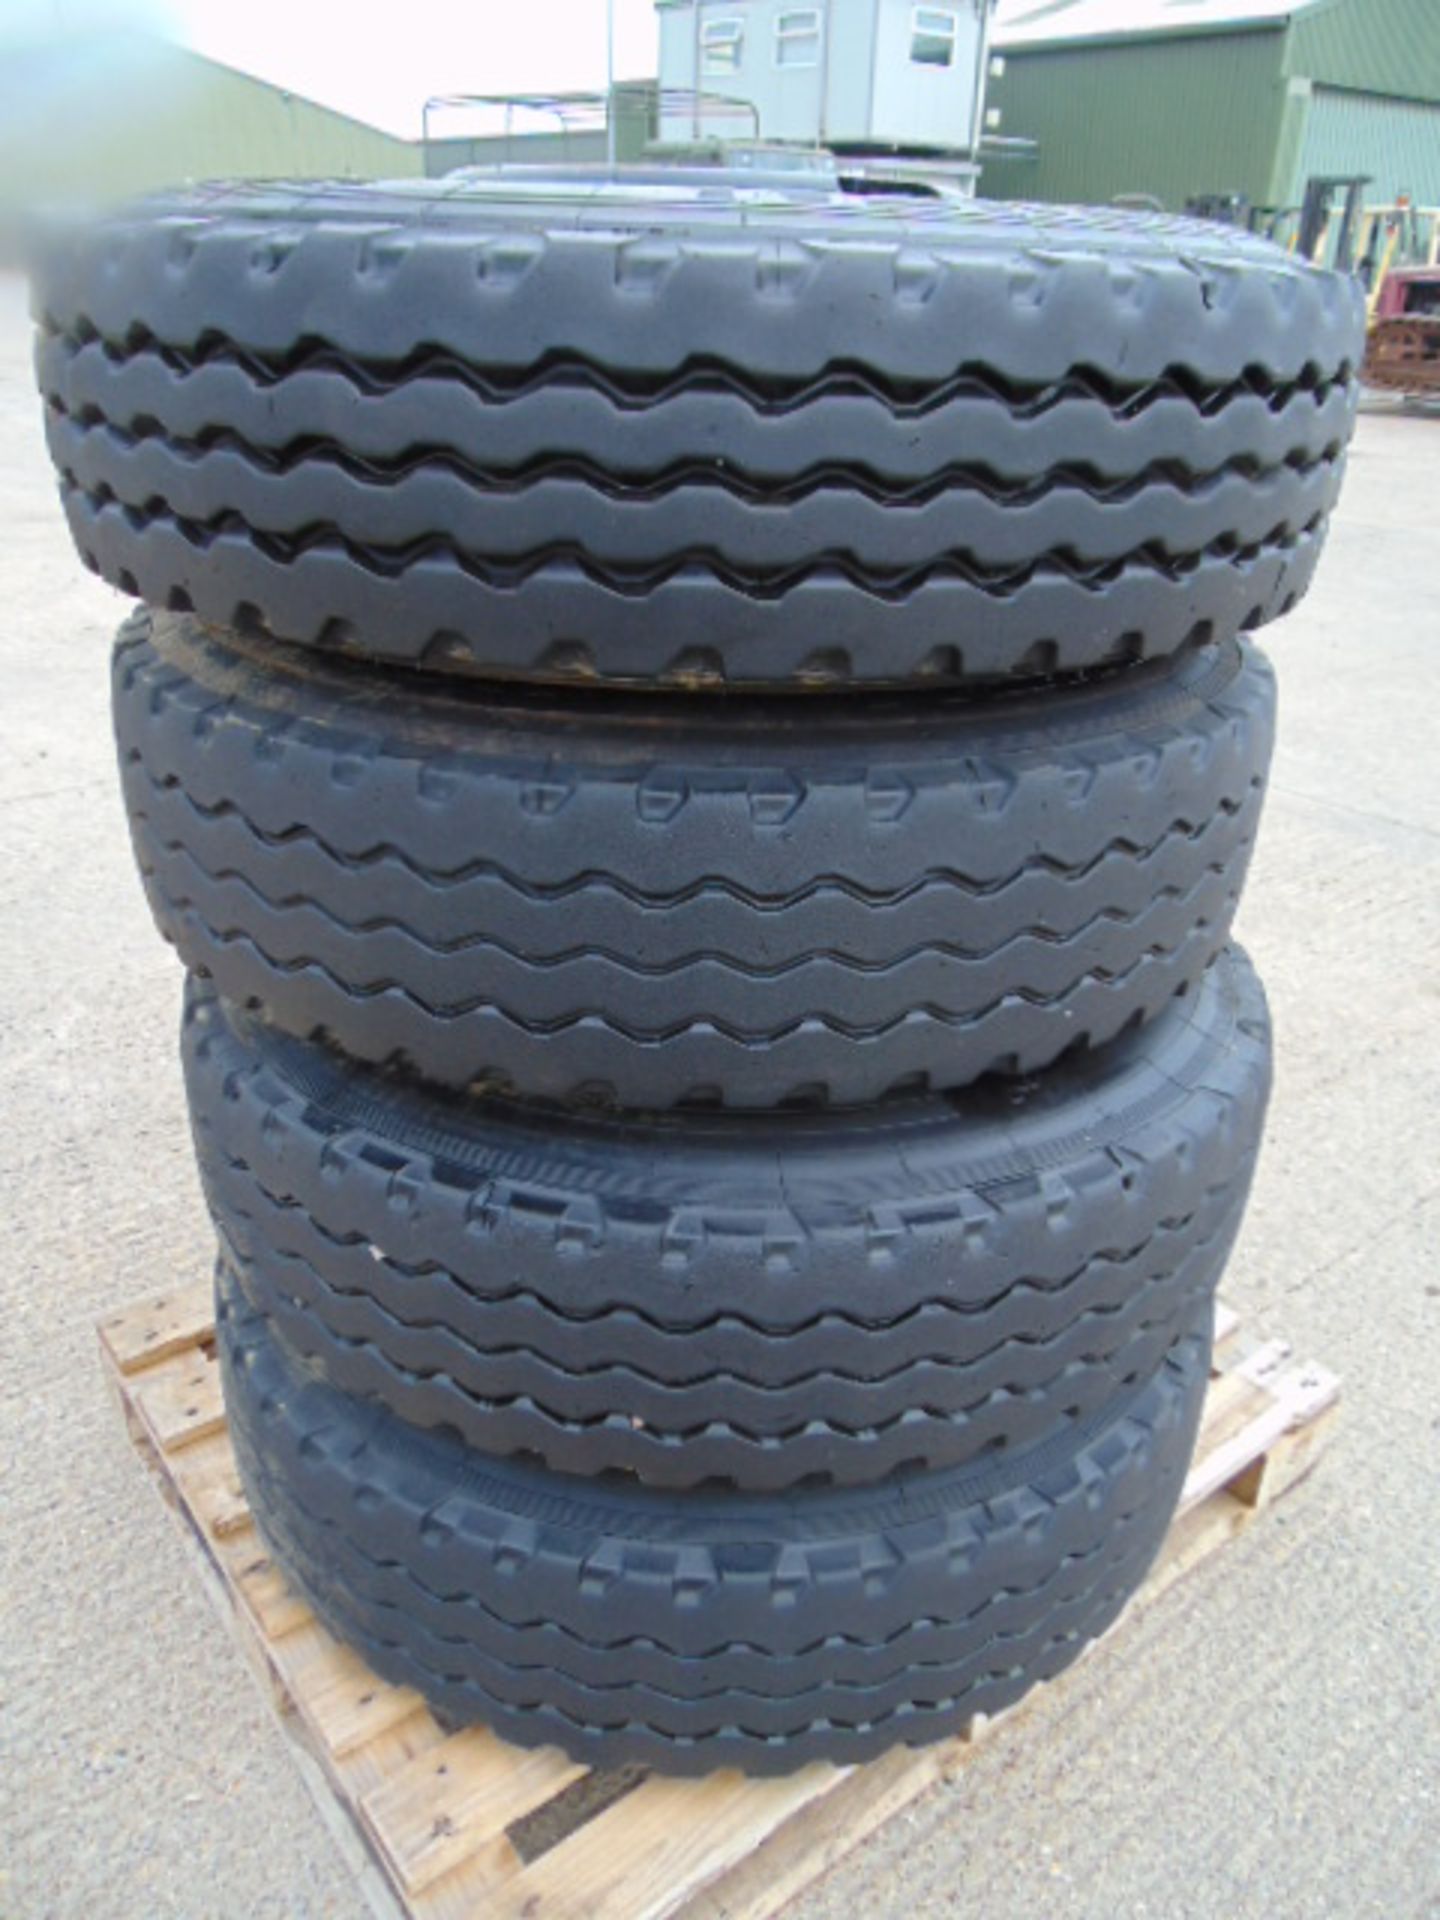 4 x Continental HSC 12.00 R20 Construction Tyres complete with 10 Stud Rims - Image 9 of 10